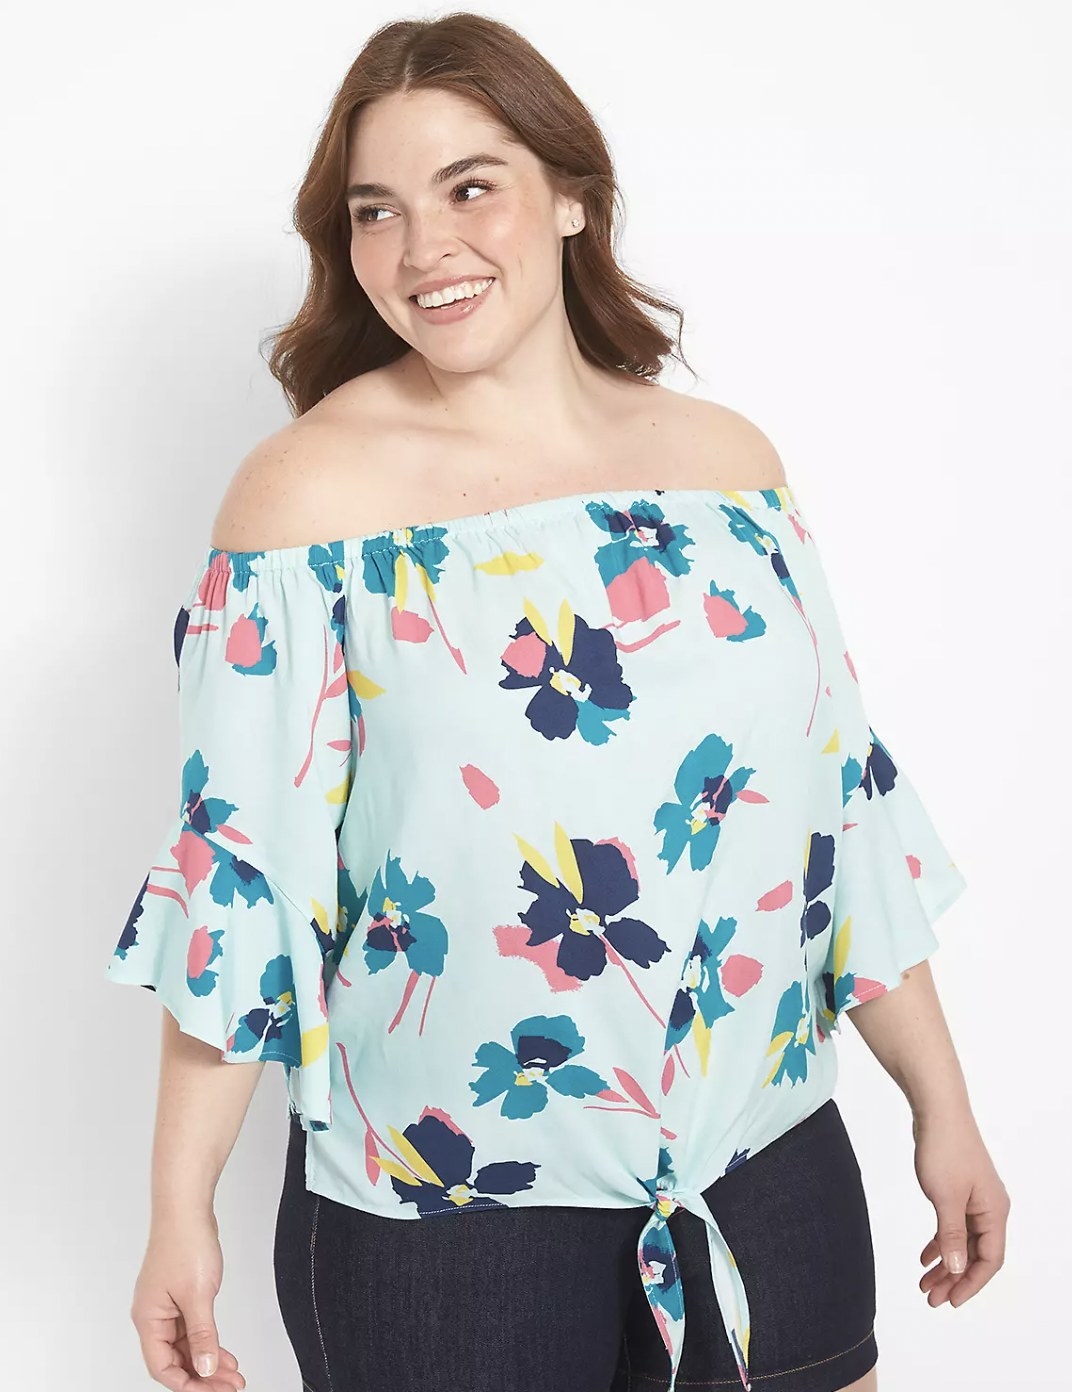 Model in the light blue with floral pattern top featuring tie-front detail at hem